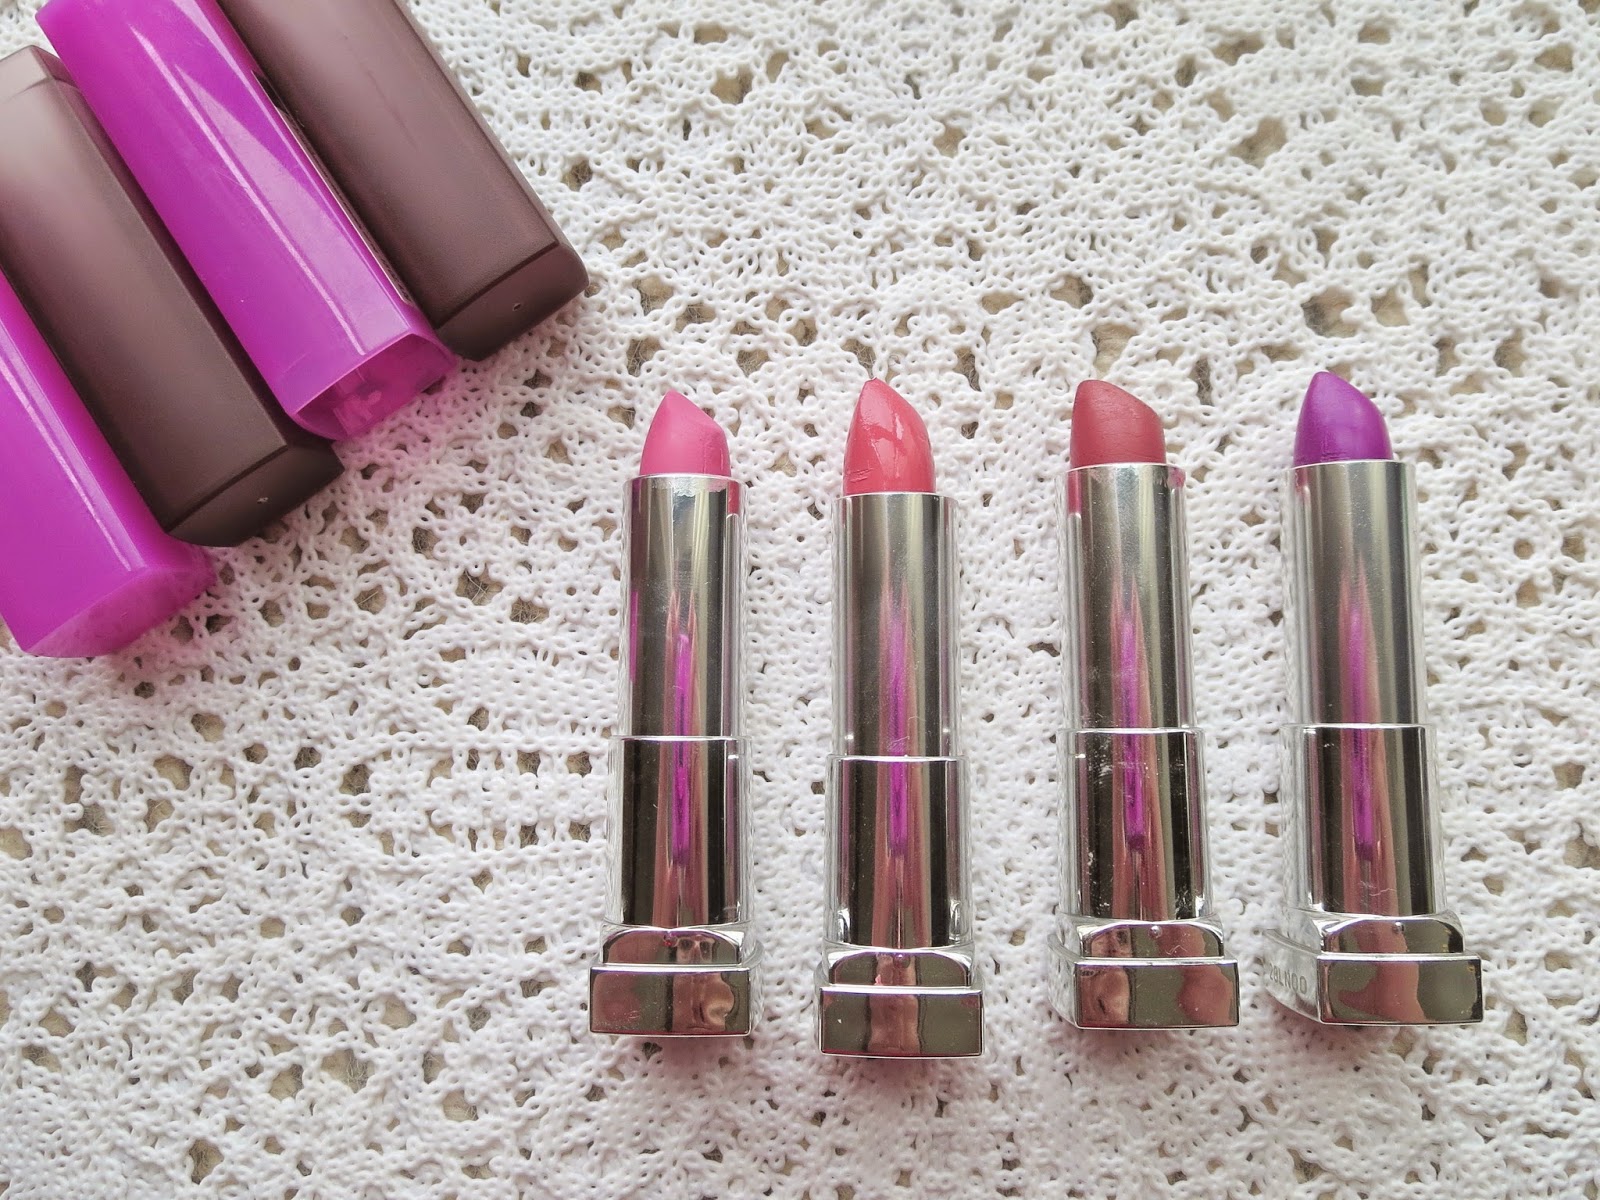 a picture of Maybelline lipsticks ; Ravishing Rose, Blushing Bud, Touch of Spice, Orchid Ecstasy